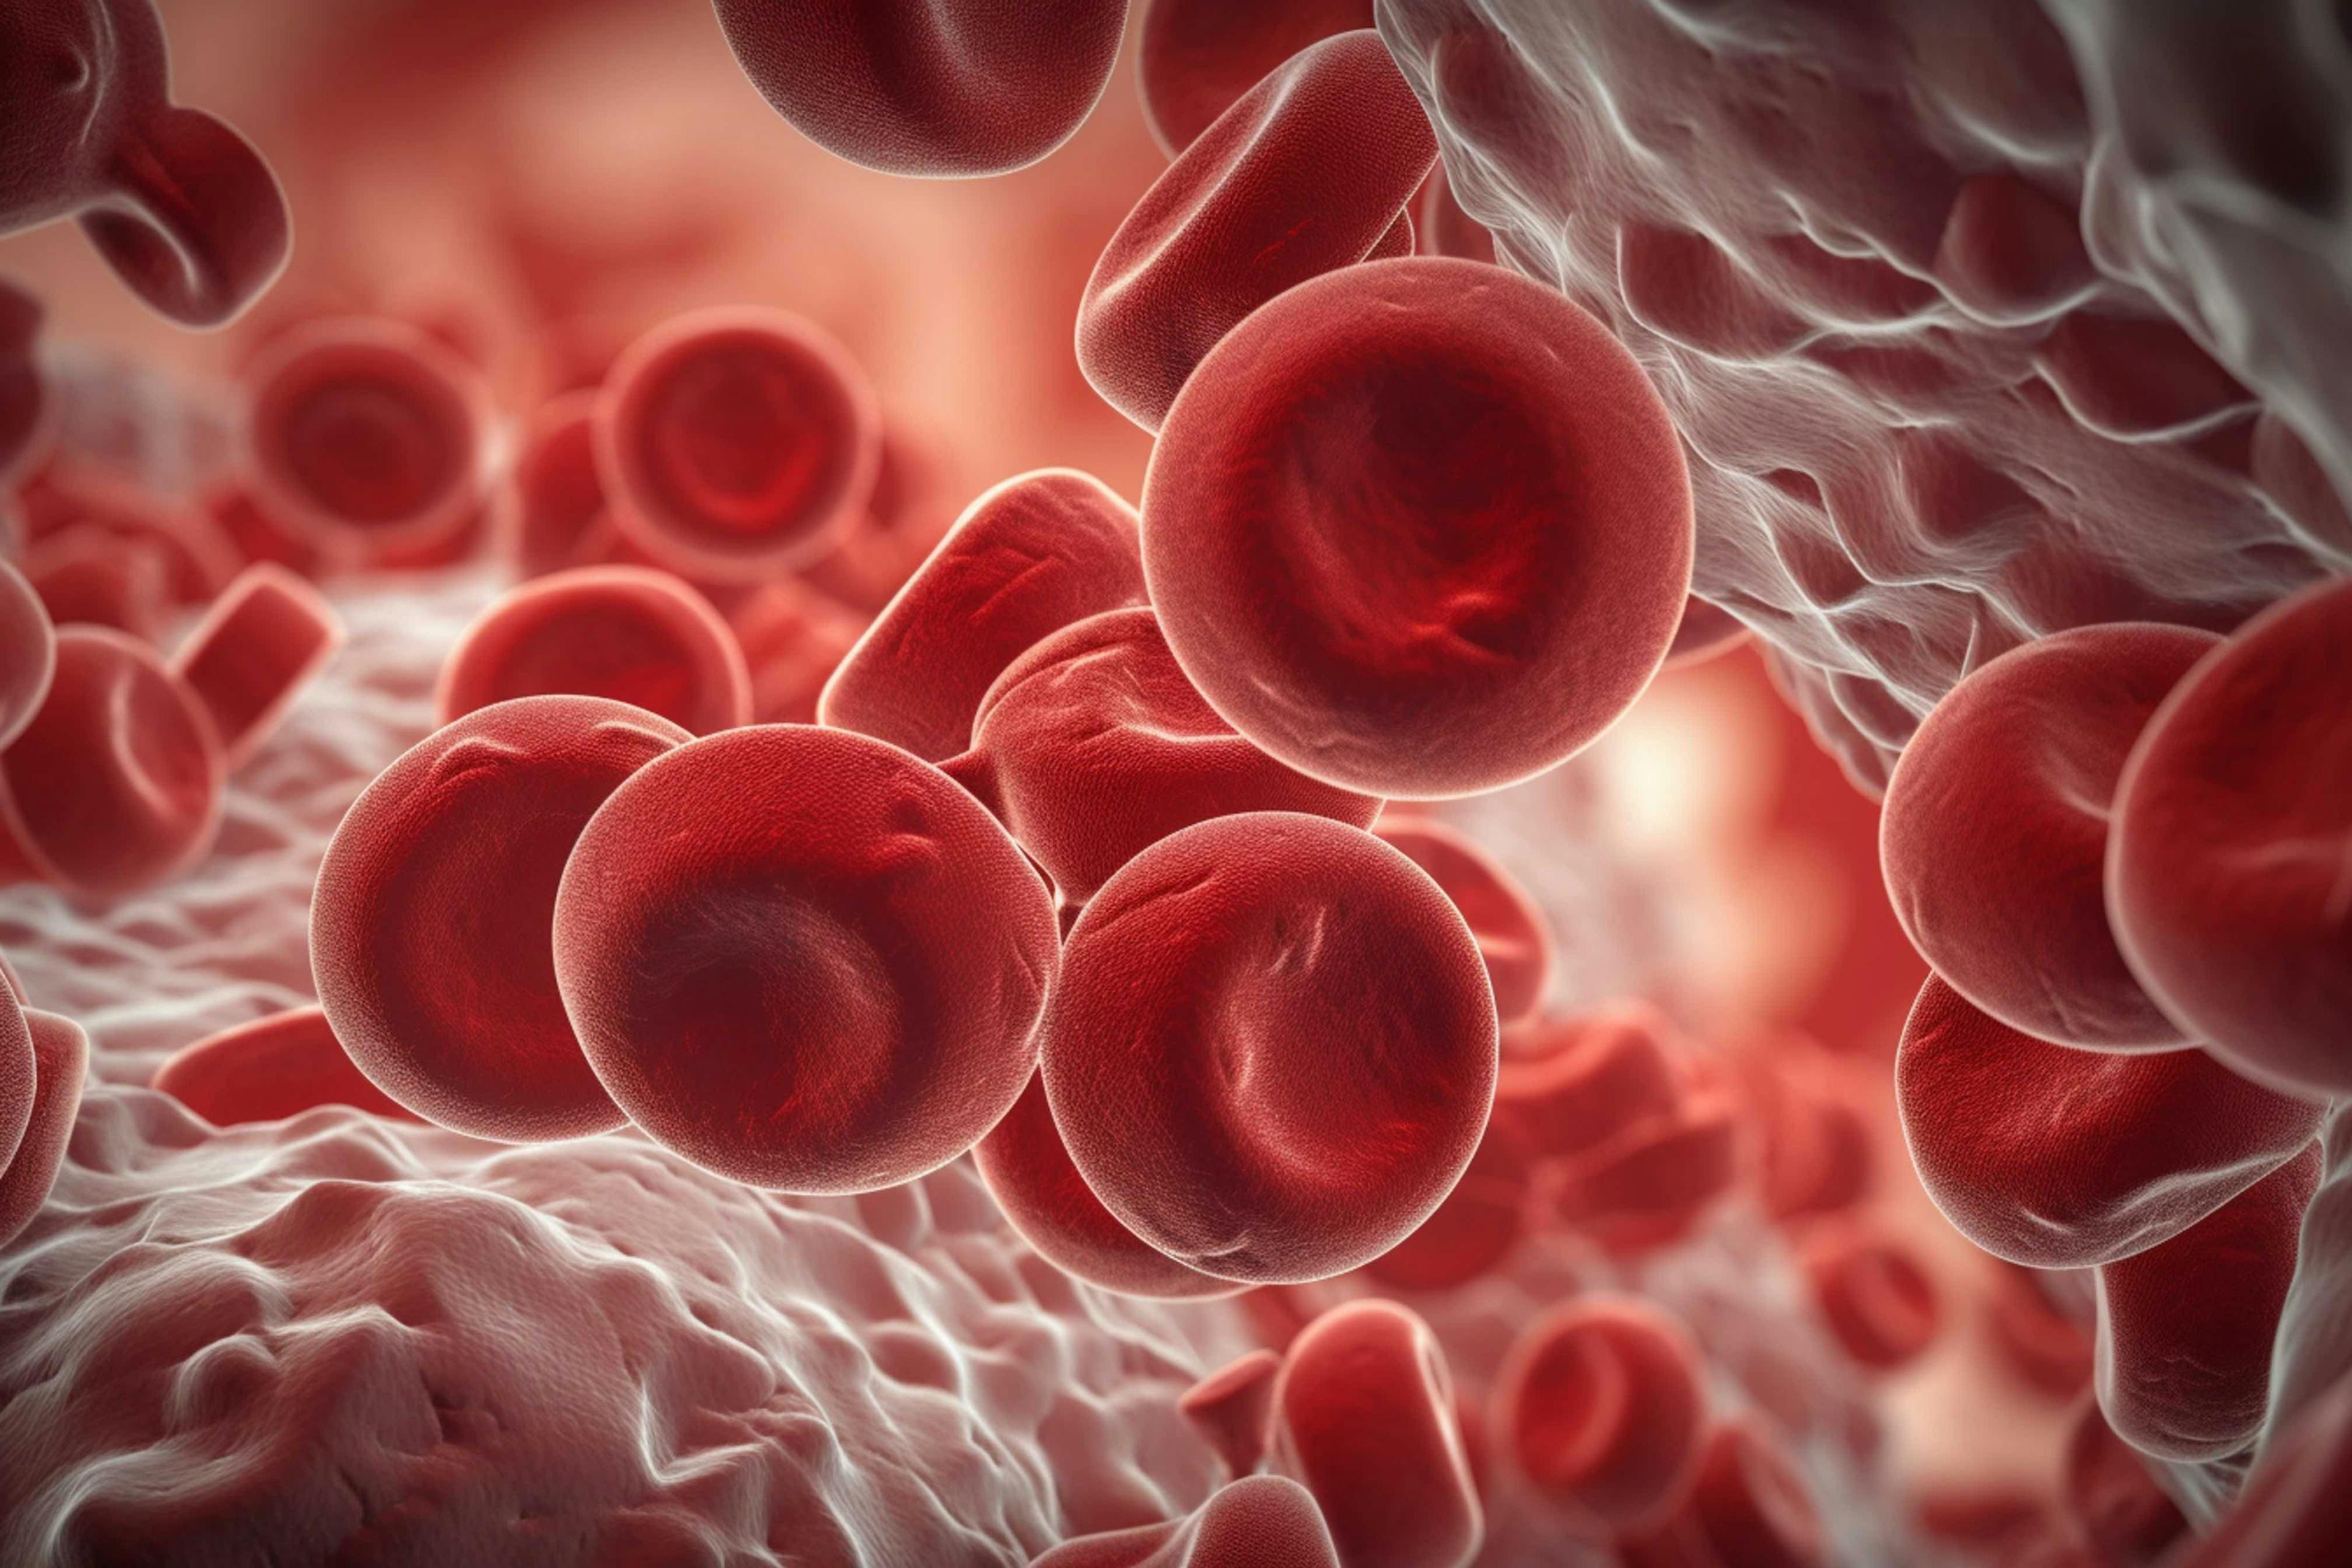 Myelodysplastic syndromes are a group of cancers in blood-forming cells in the bone marrow are abnormal. They may progress to leukemia.

Image credit: Катерина Євтехова - stock.adobe.com.jpg